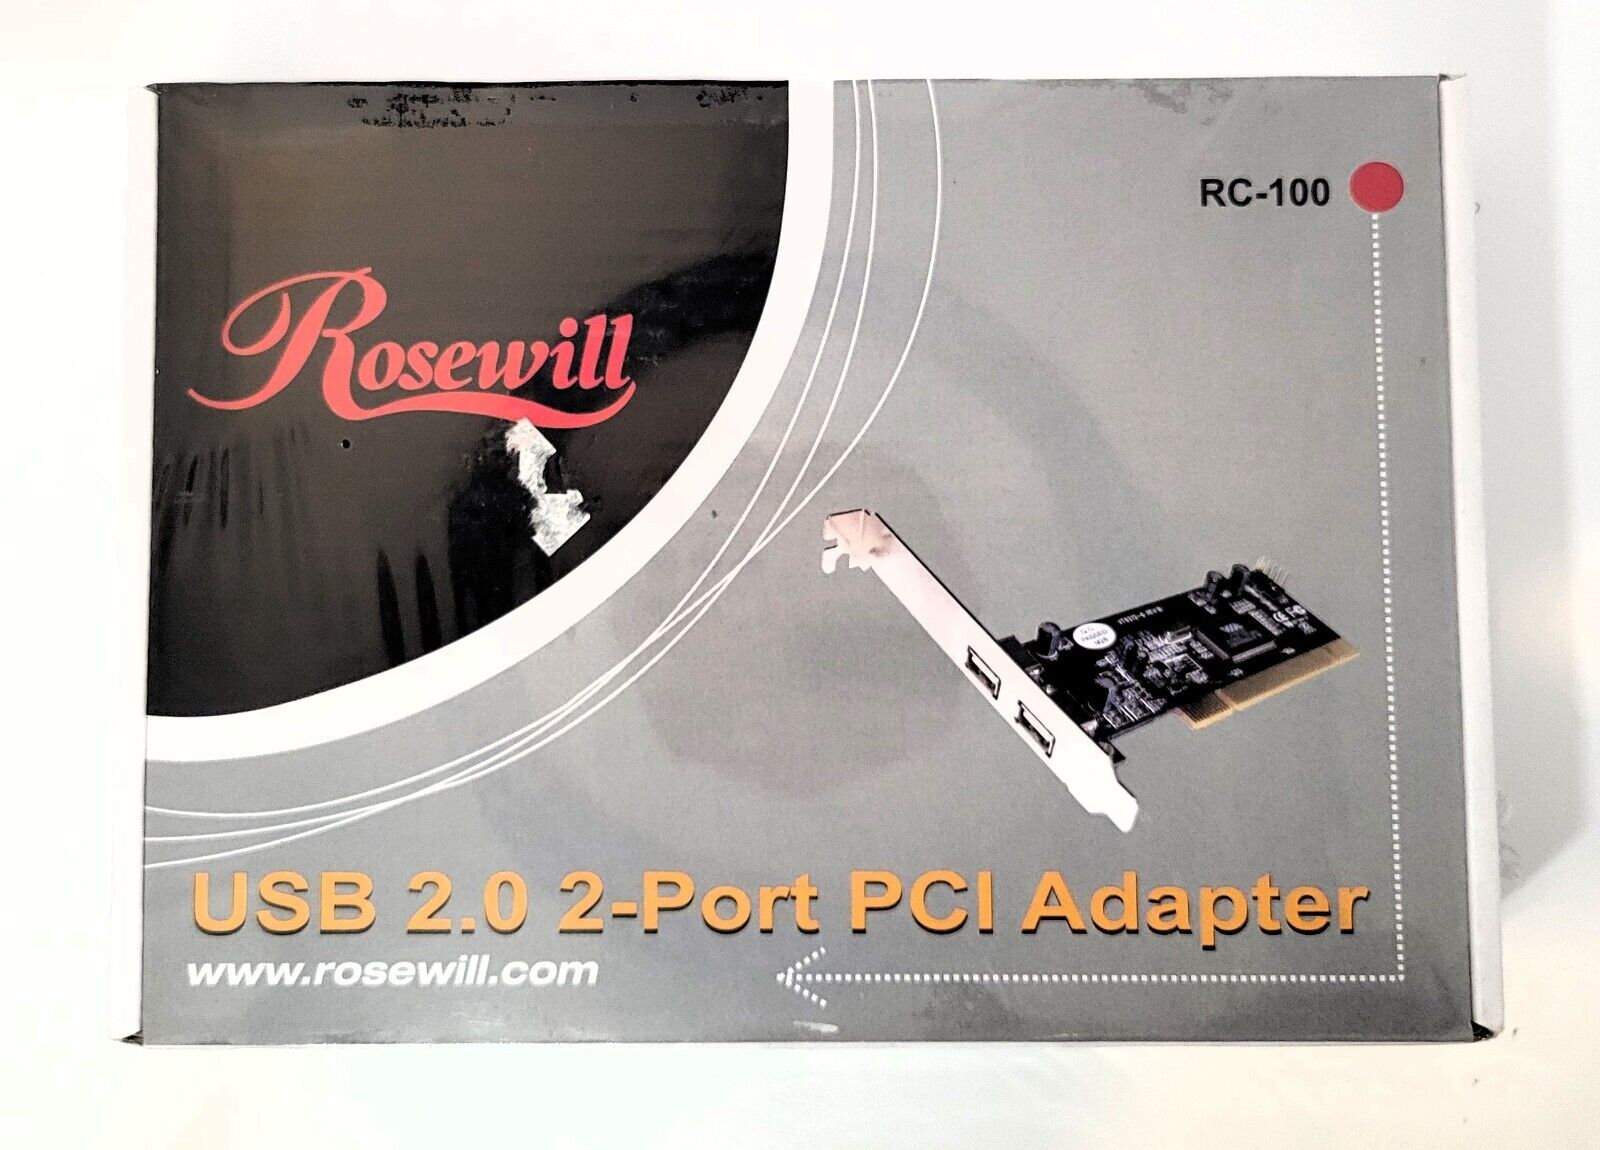 Rosewill RC-100 USB 2.0 2-Port PCI Adapter - NEW